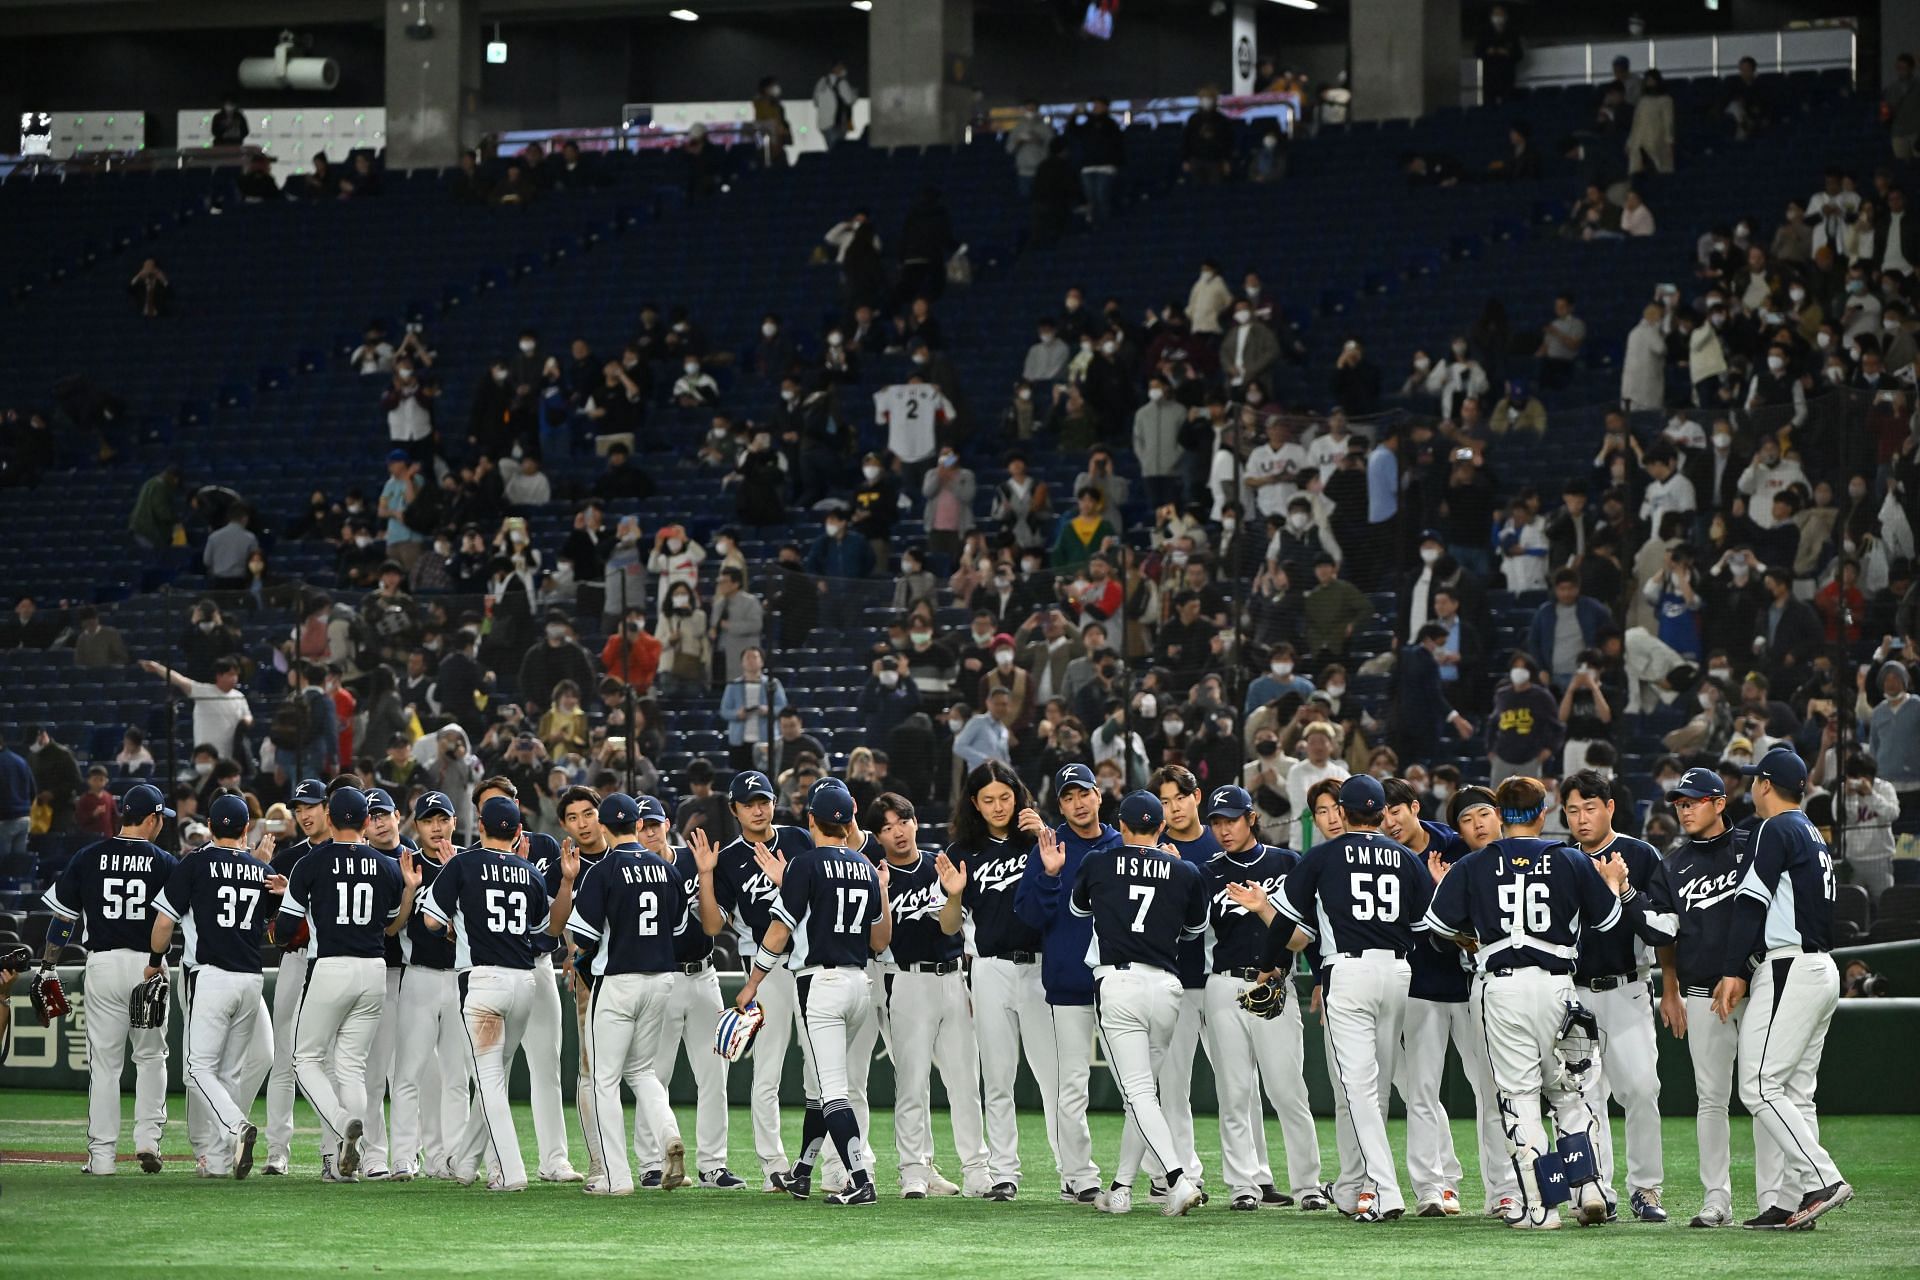 Korea needs to rebuild after WBC disappointment